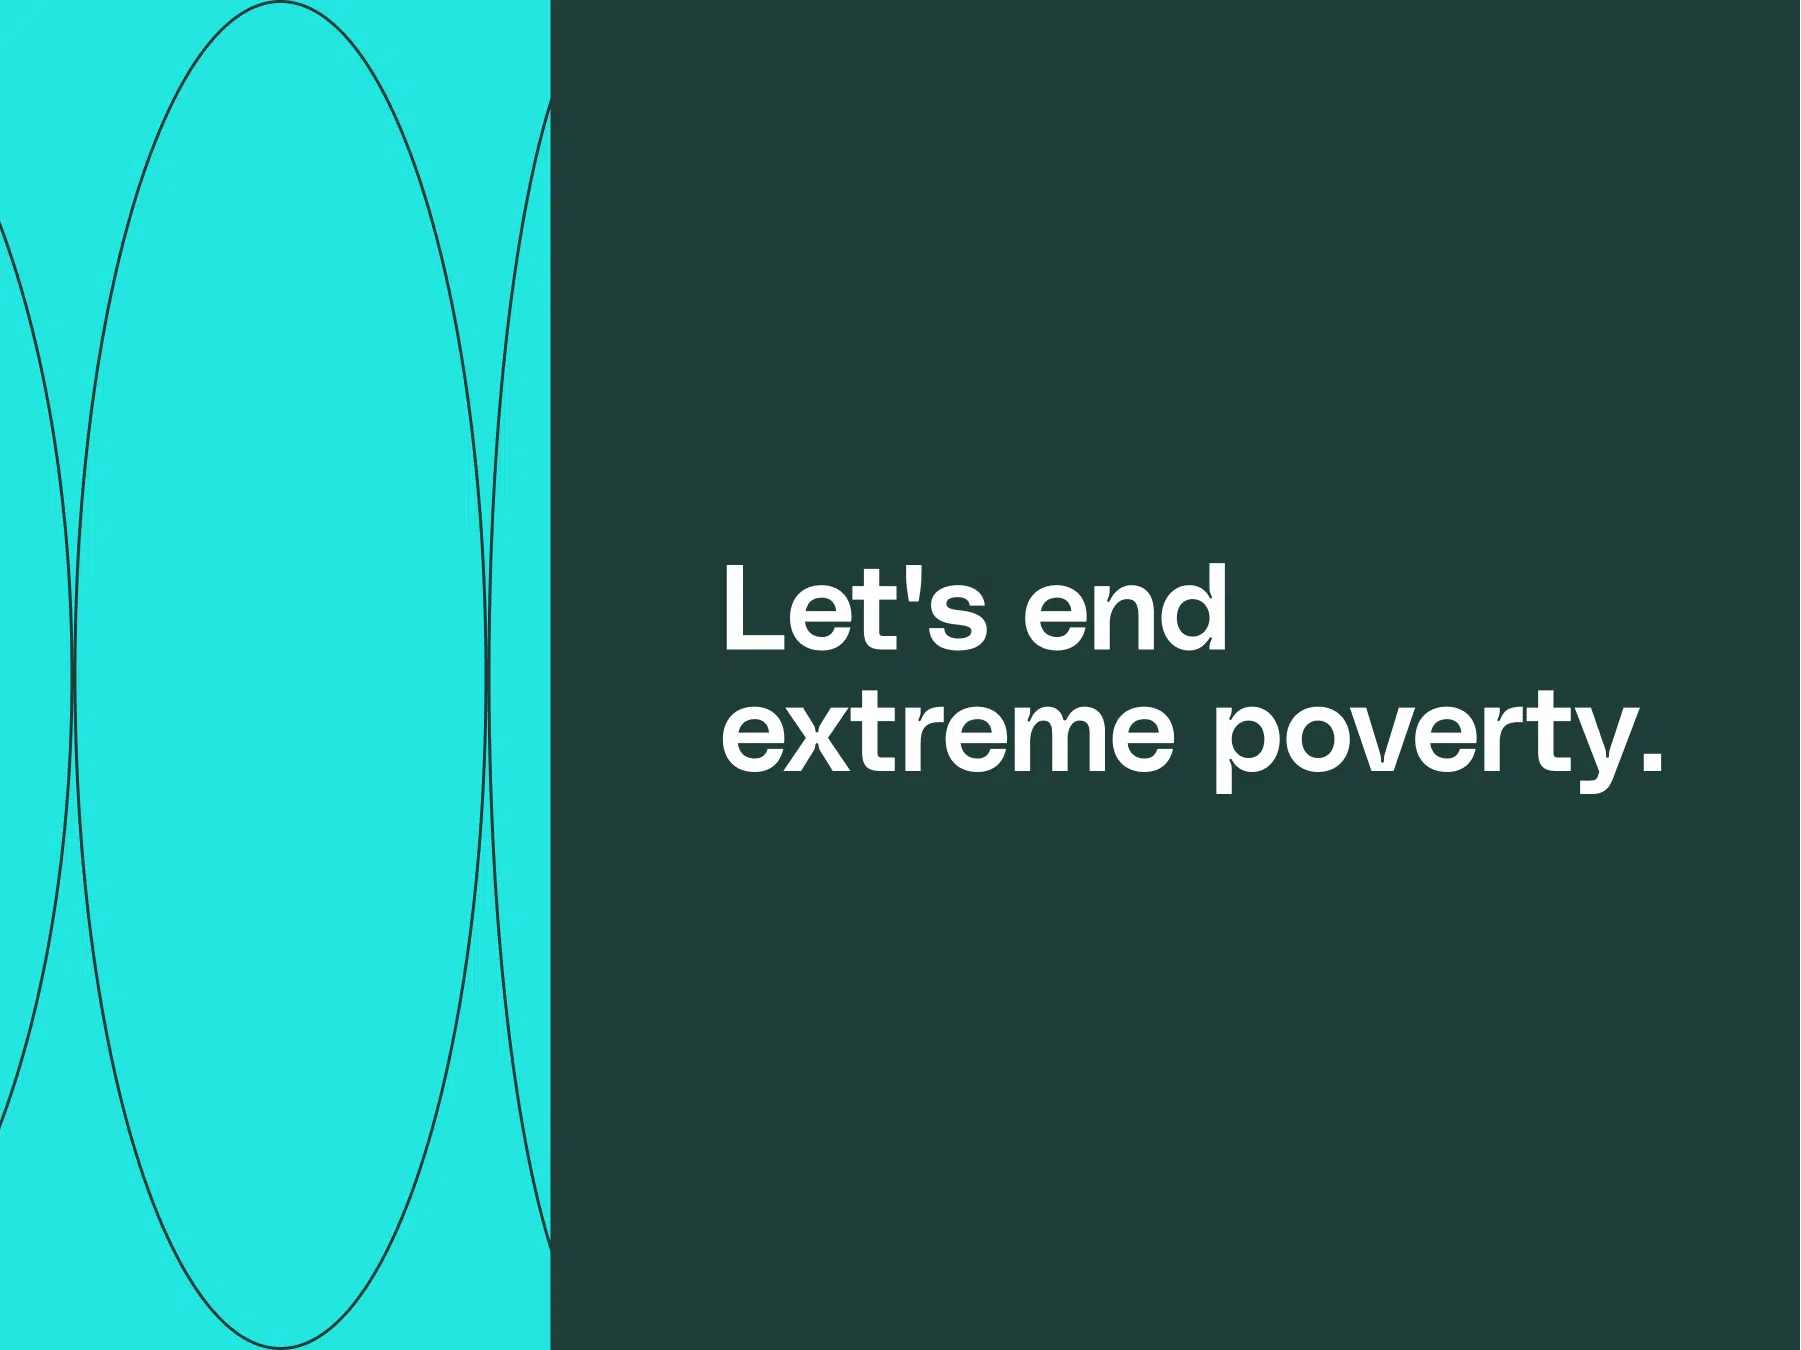 Let's end extreme poverty